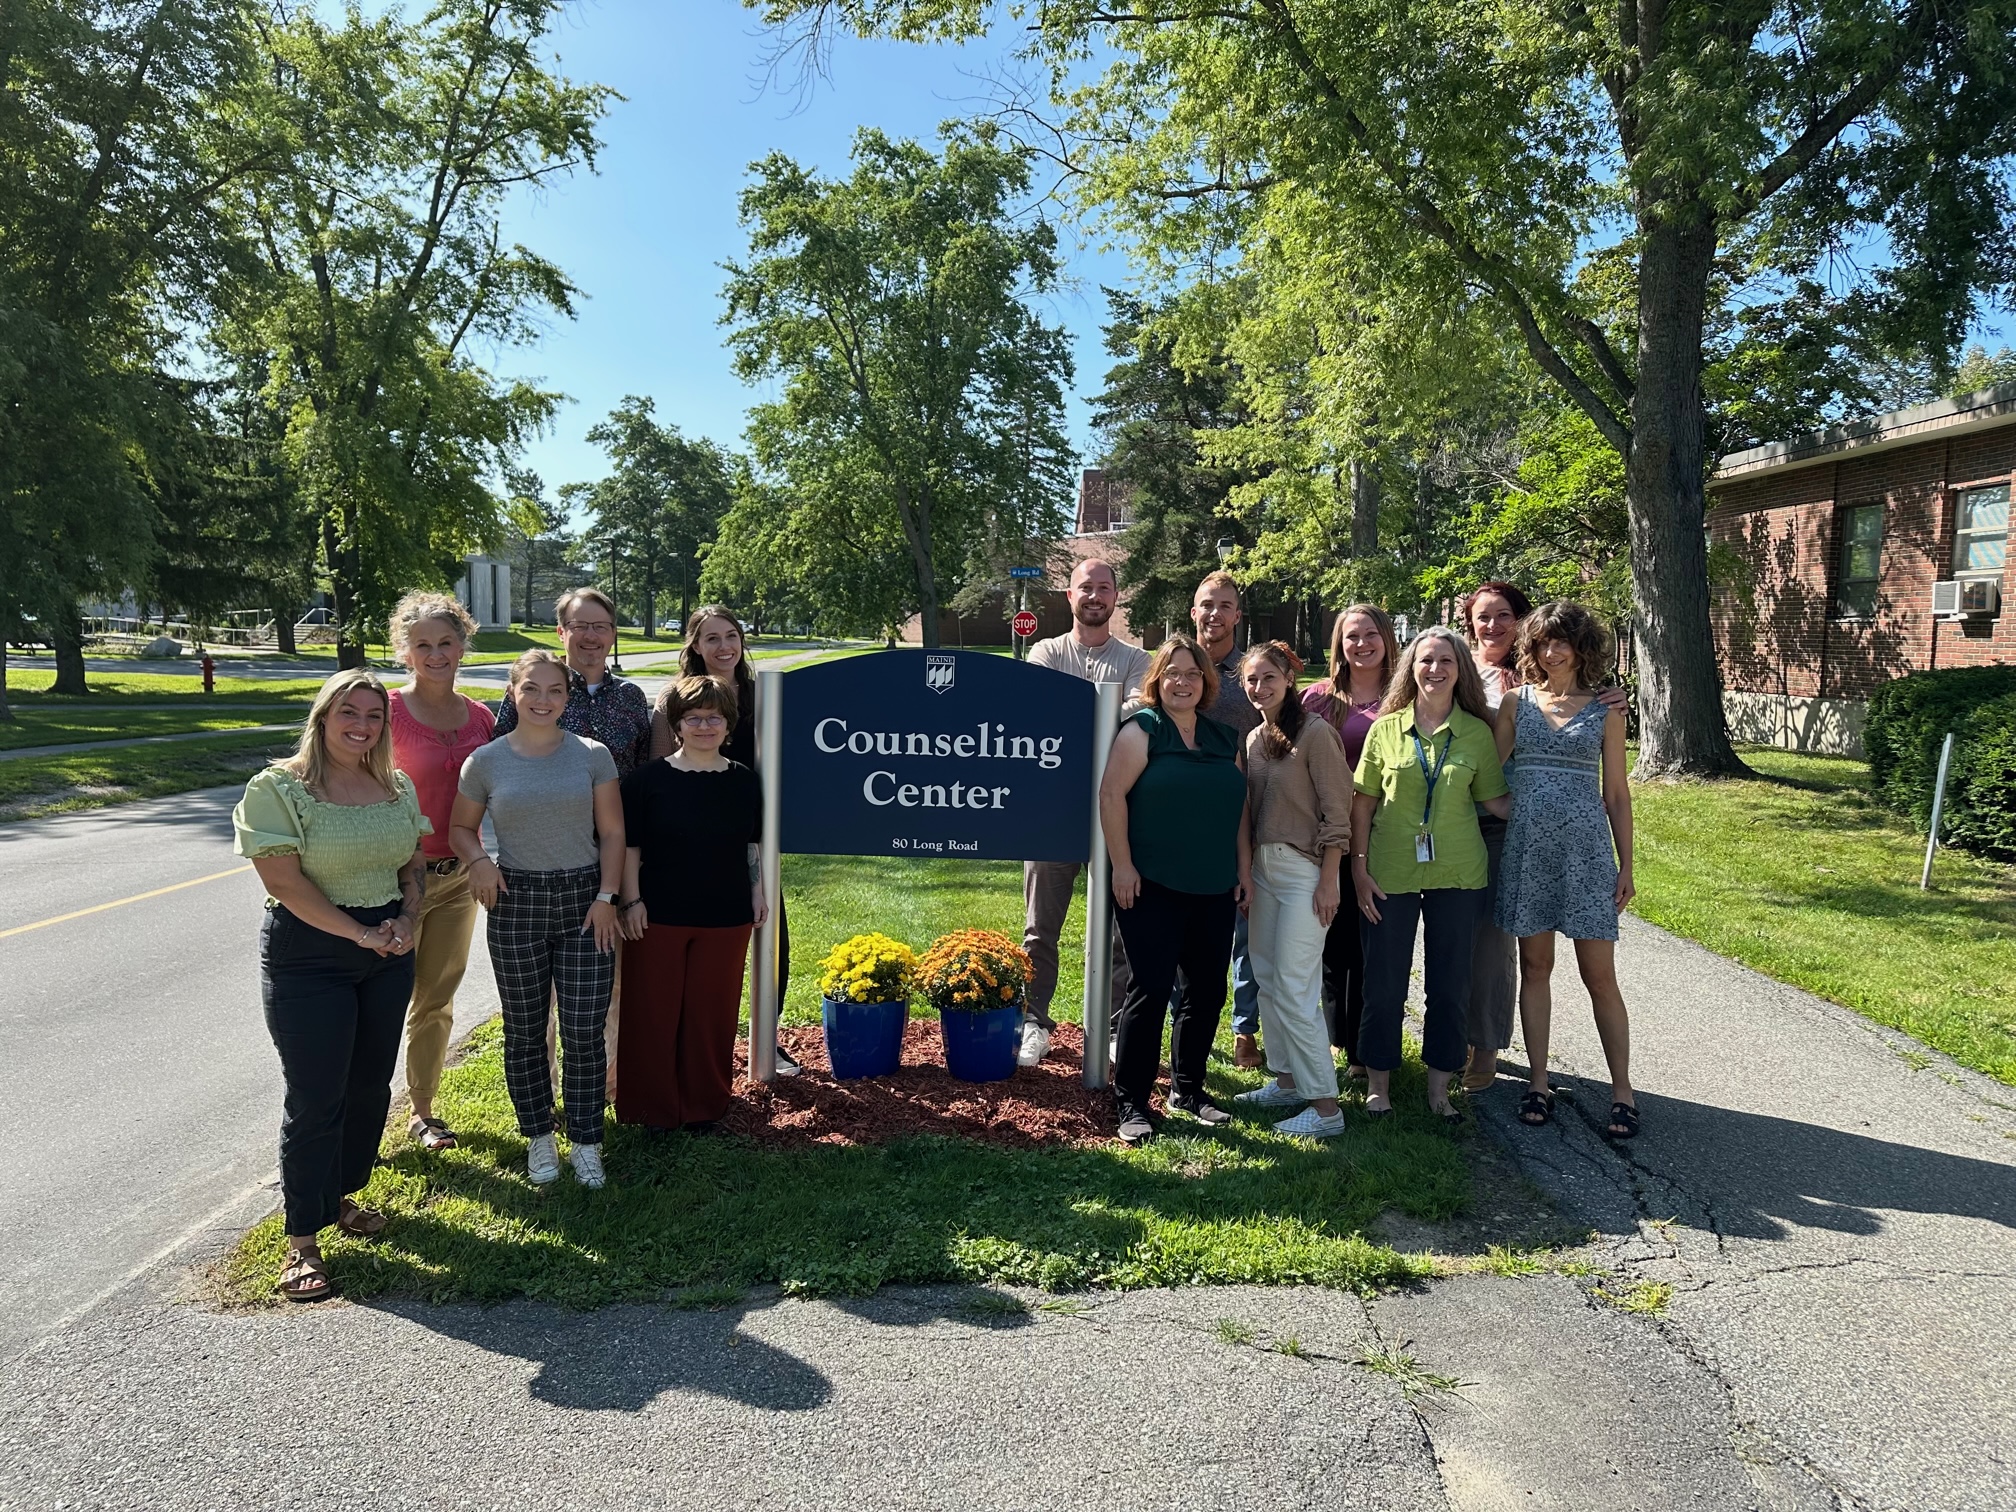 Counseling Center staff in front of Counseling Center sign